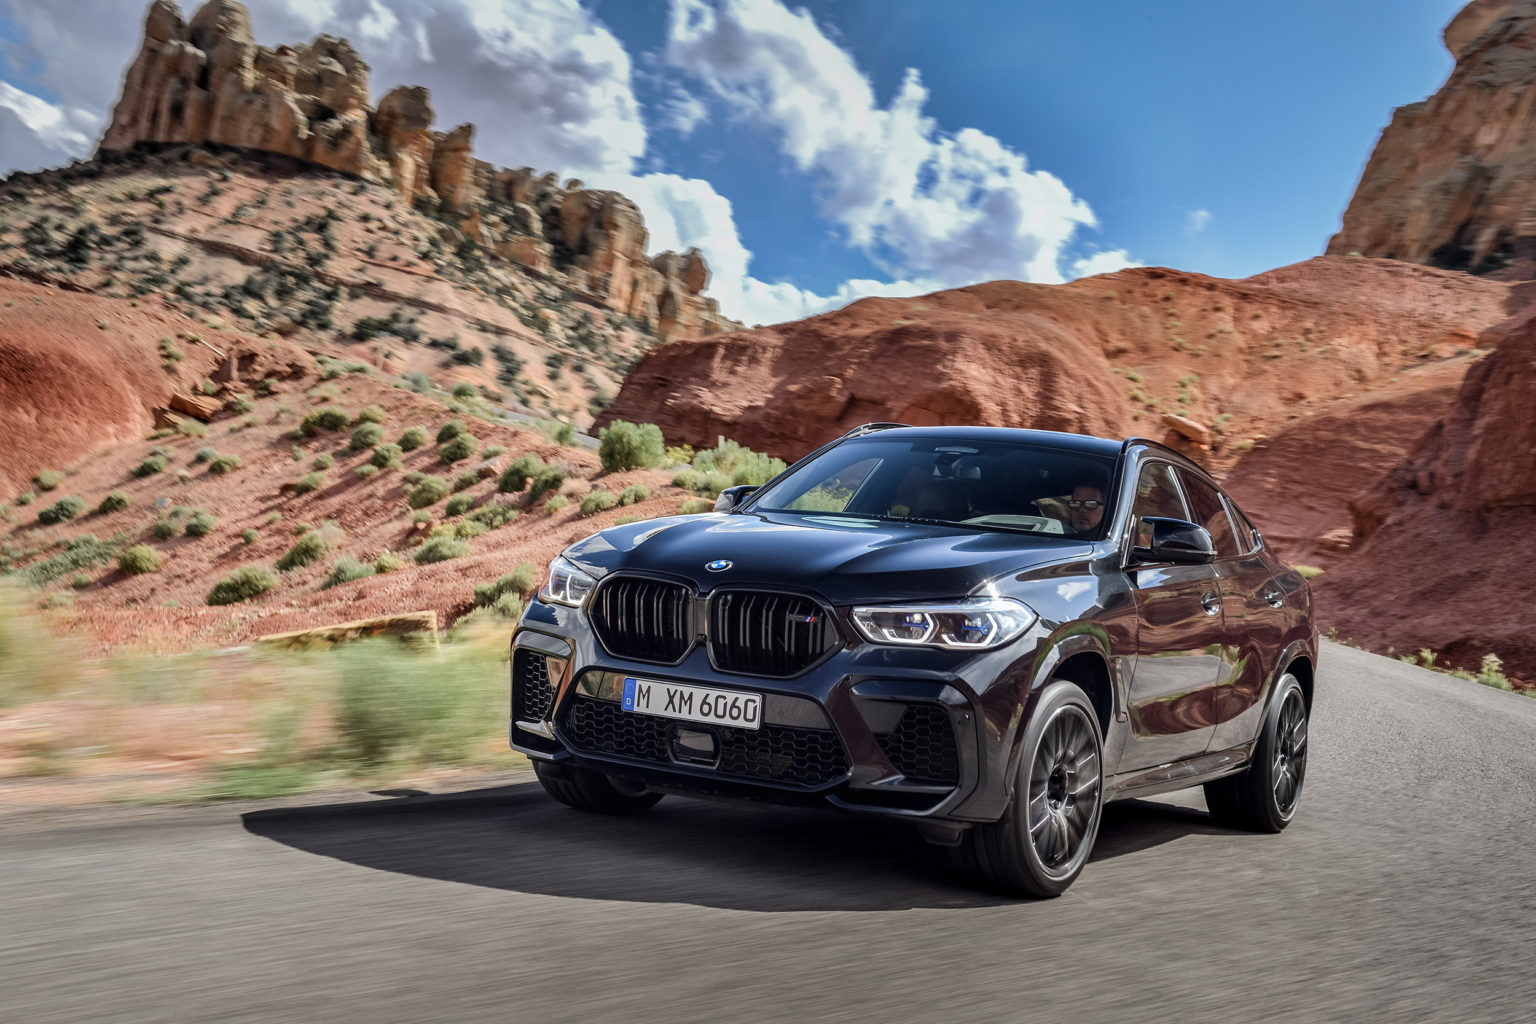 The 2020 BMW X6 M Competition is a standout during track days and as a daily driver.